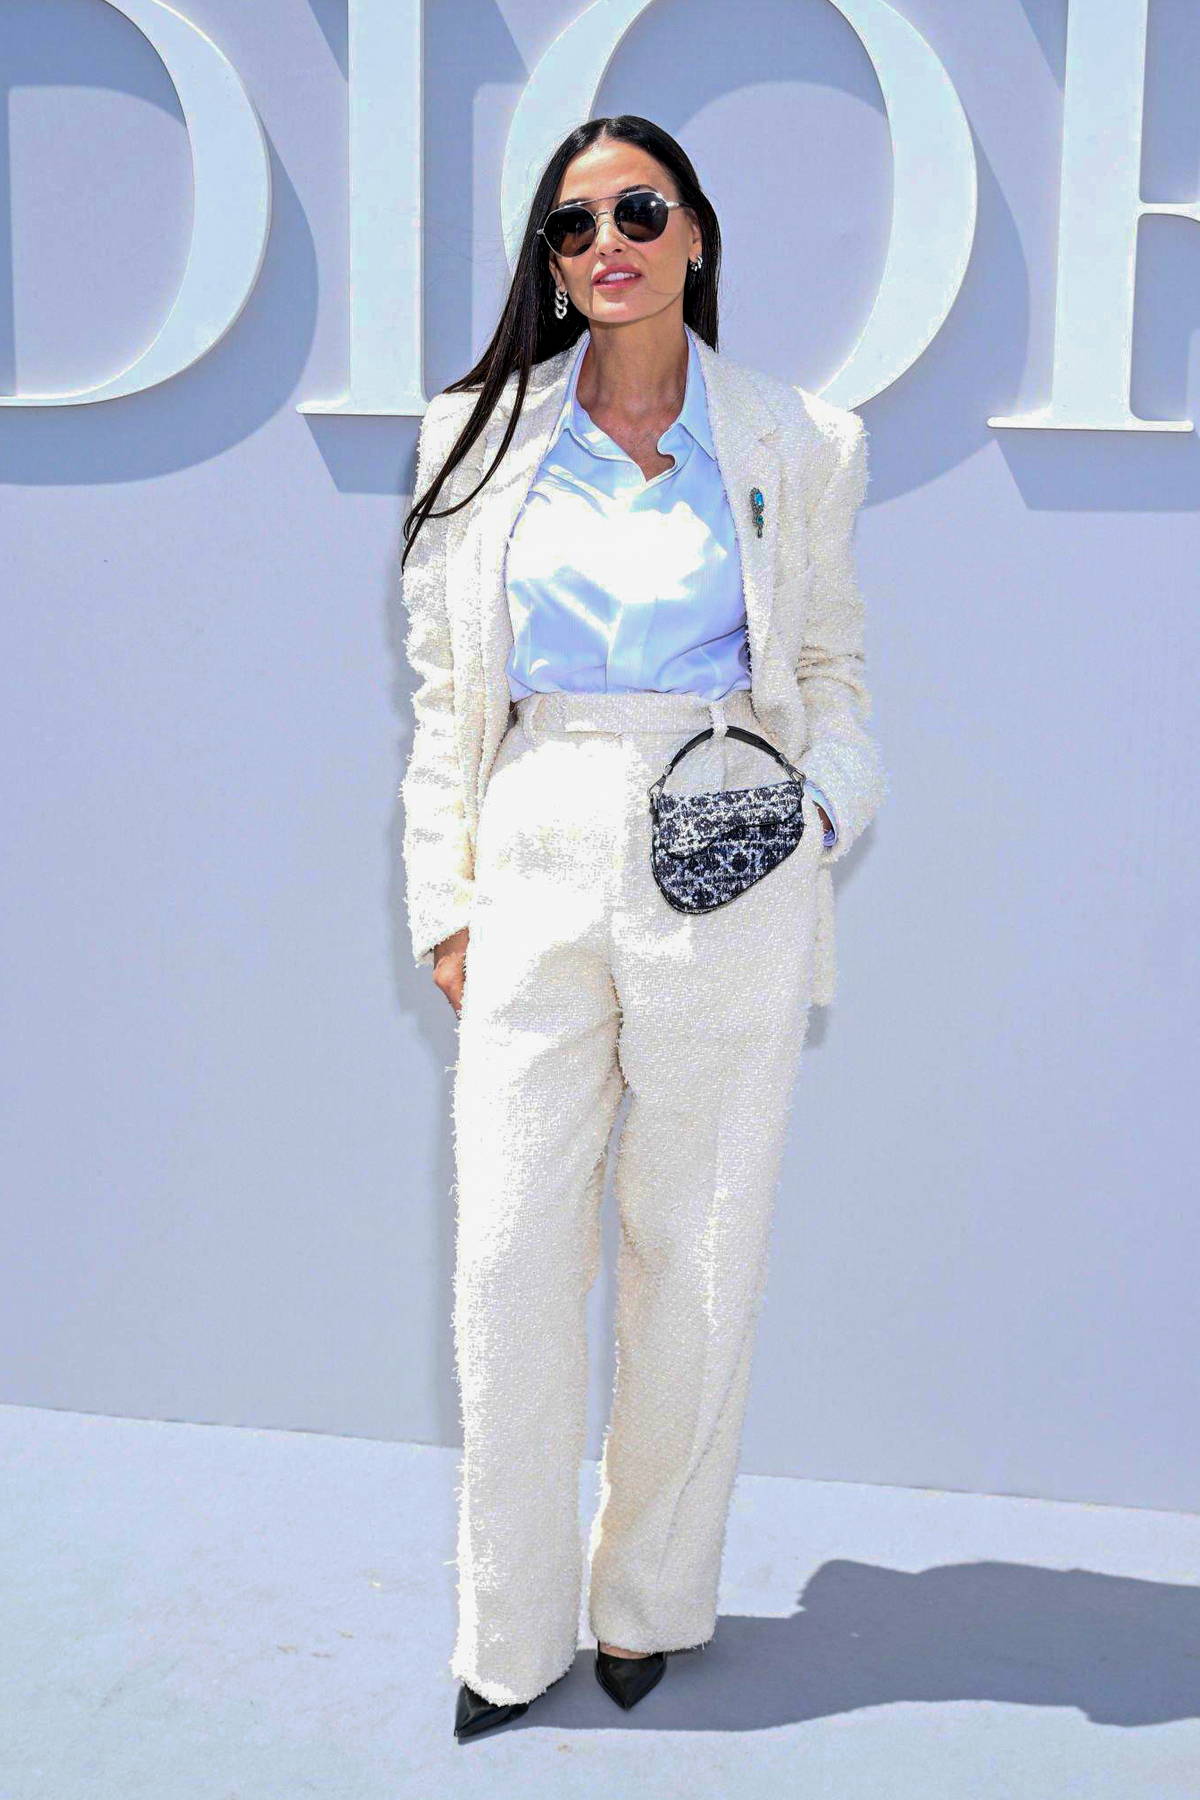 Demi Moore Is the Epitome of Rich Mom Energy in White Jeans and